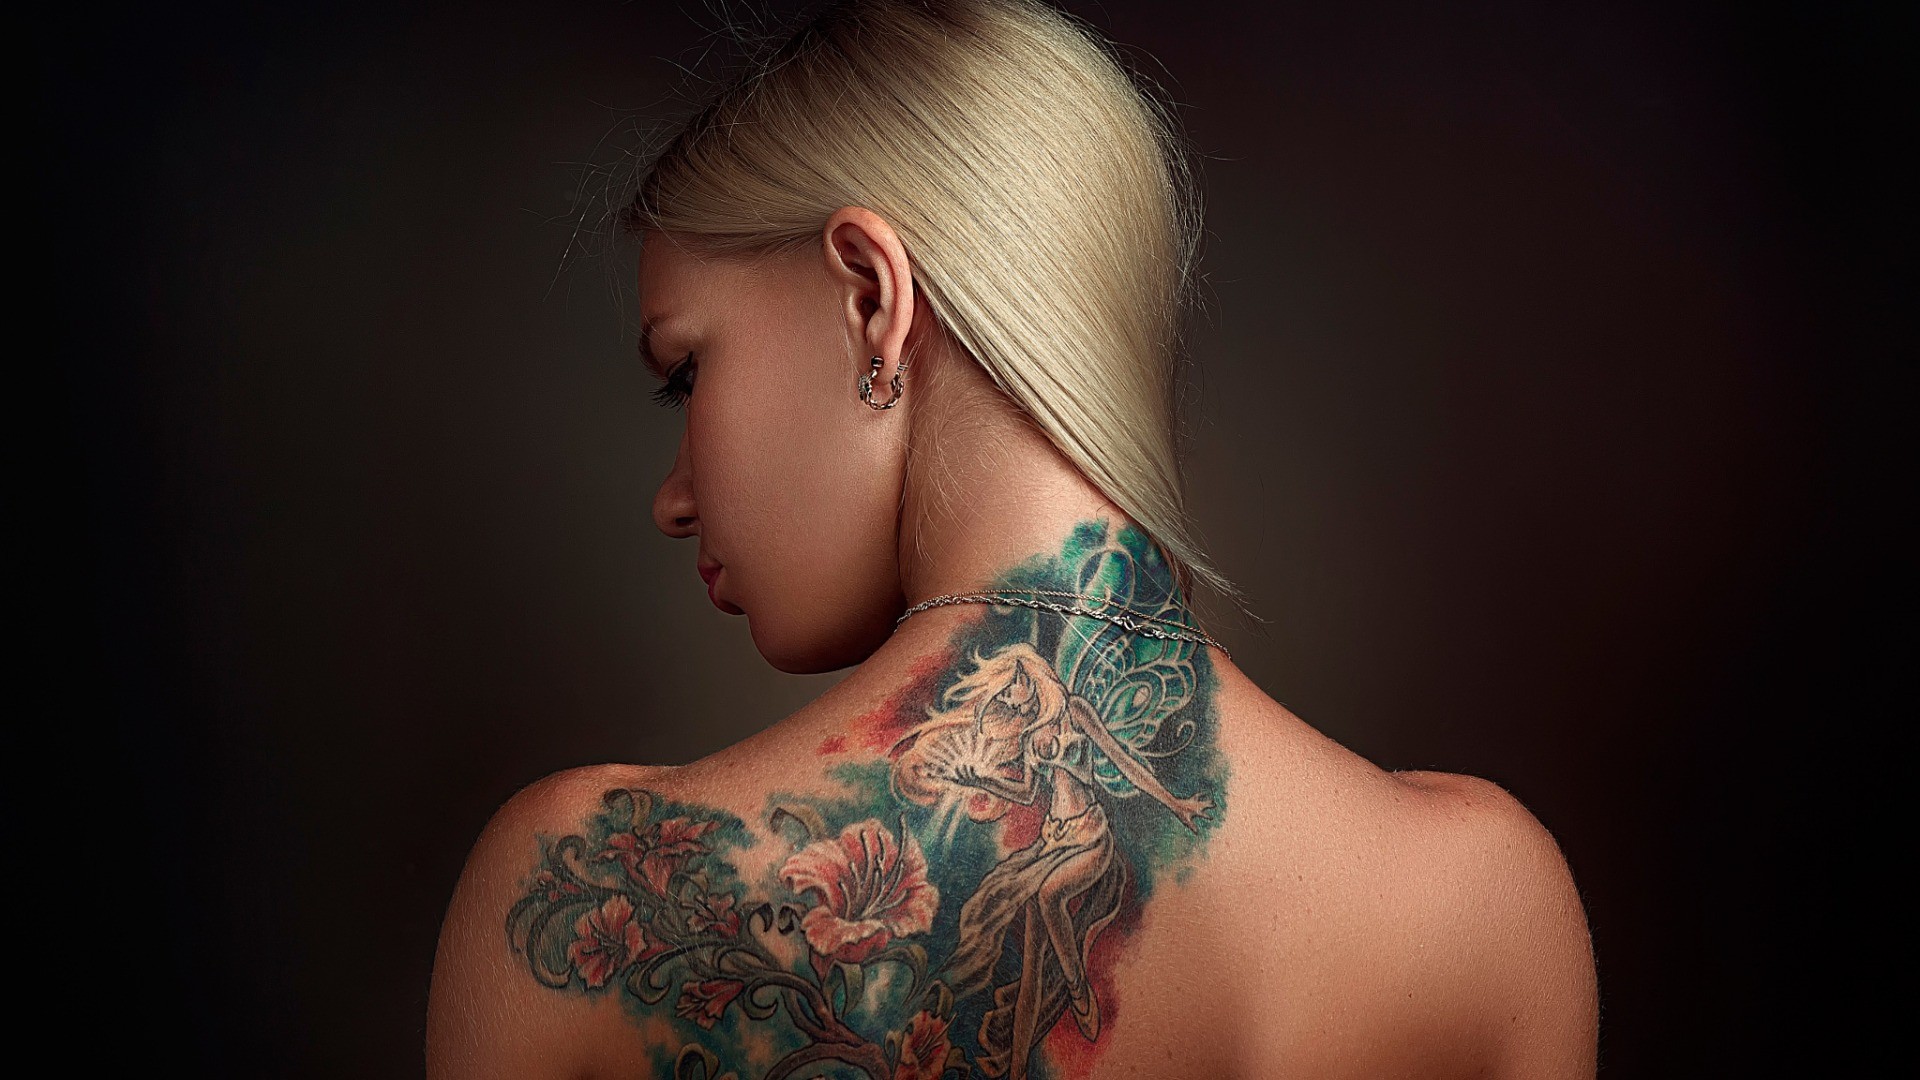 People 1920x1080 women model blonde long hair tattoo bare shoulders back rear view earring simple background face portrait women indoors indoors inked girls studio brown background